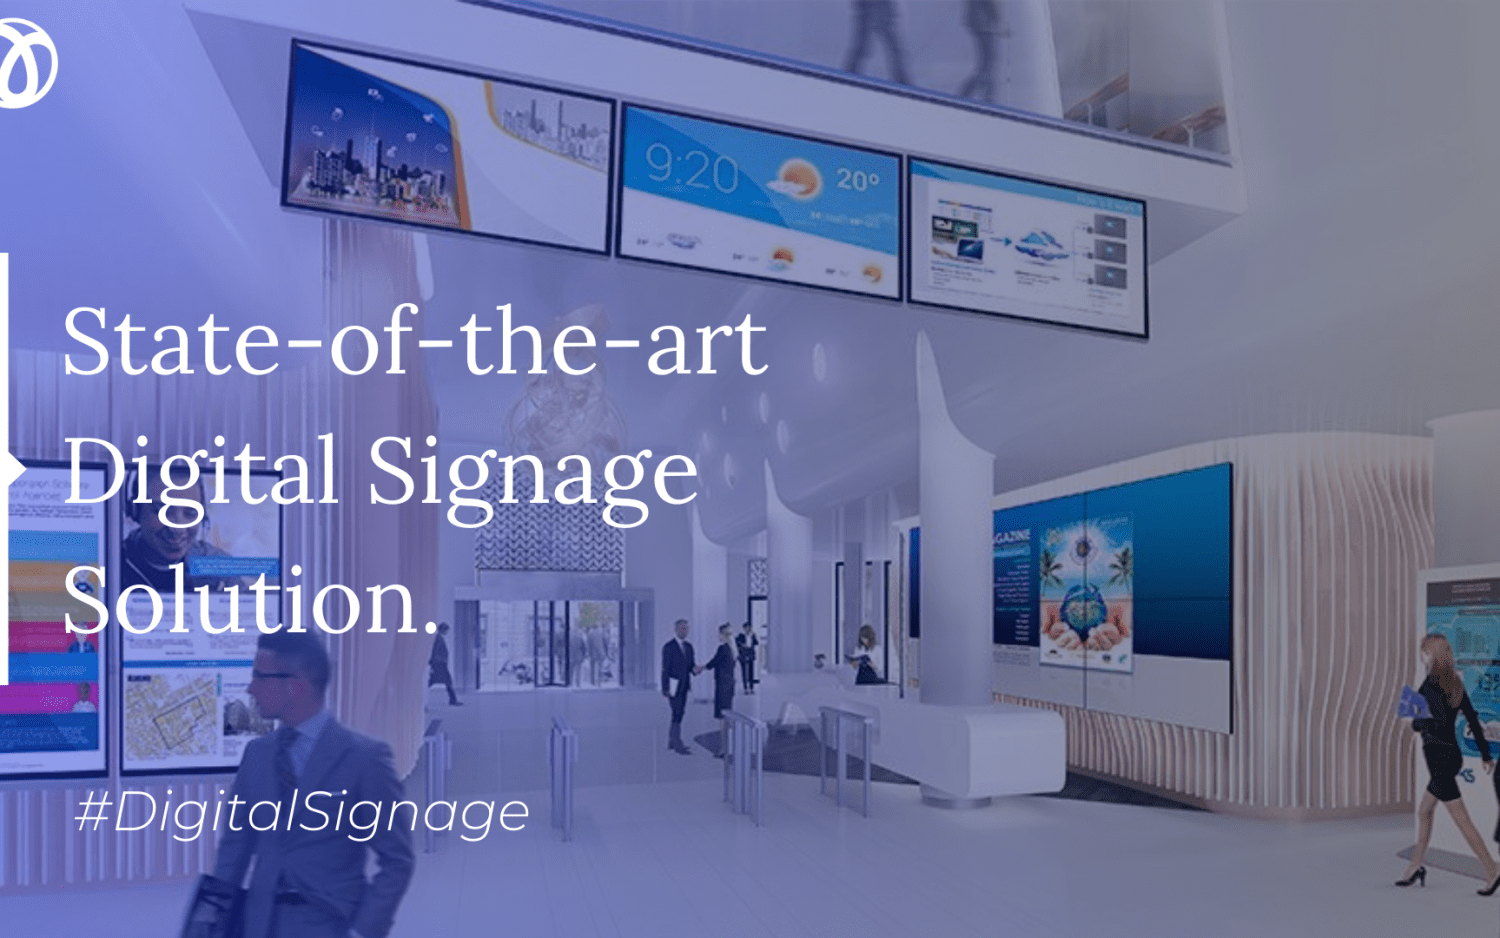 Emerging Use Cases for Digital Signage Solutions in The Post-Pandemic Enterprise